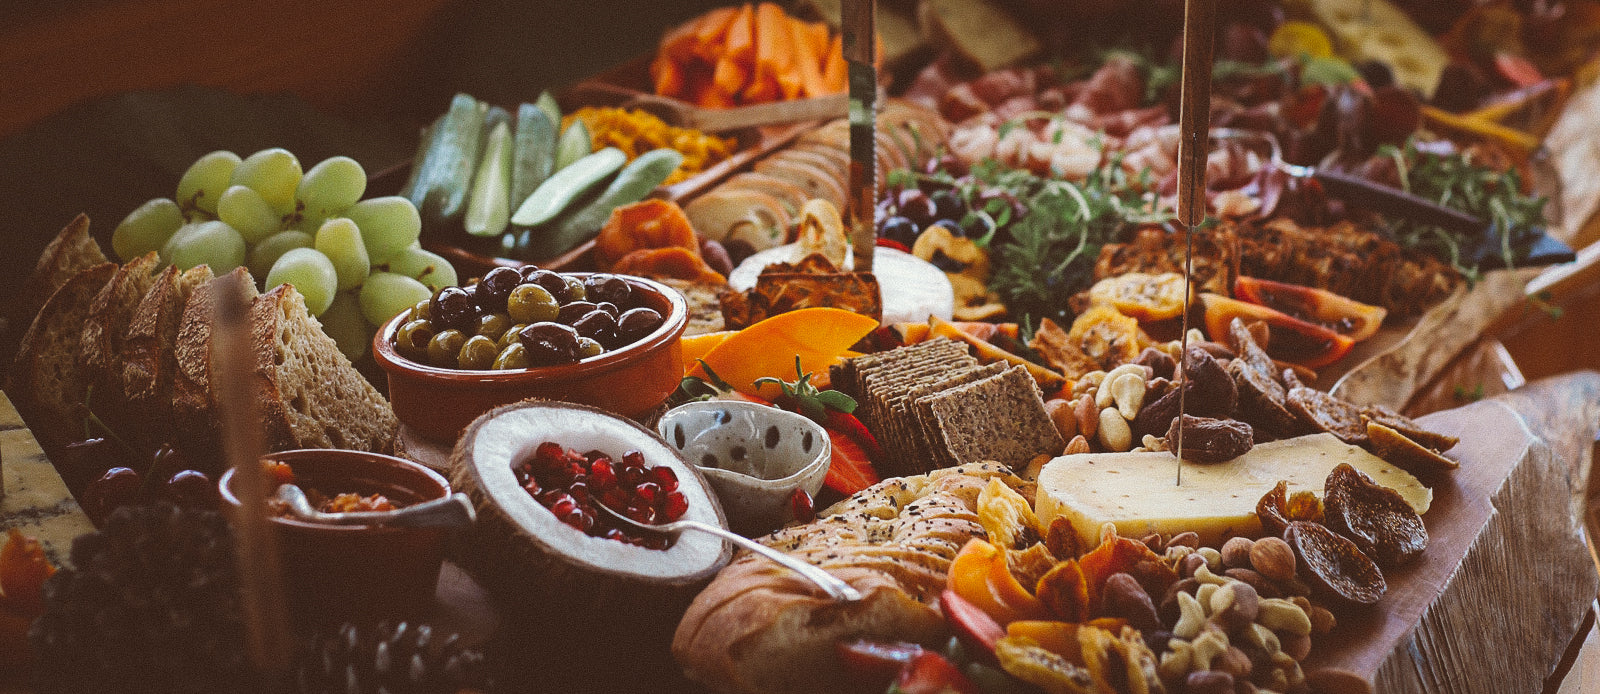 On-Board-Kitchen-Caterer-Auckland-Grazing-Platters-Grazing-Boards-Grazing-Boxes